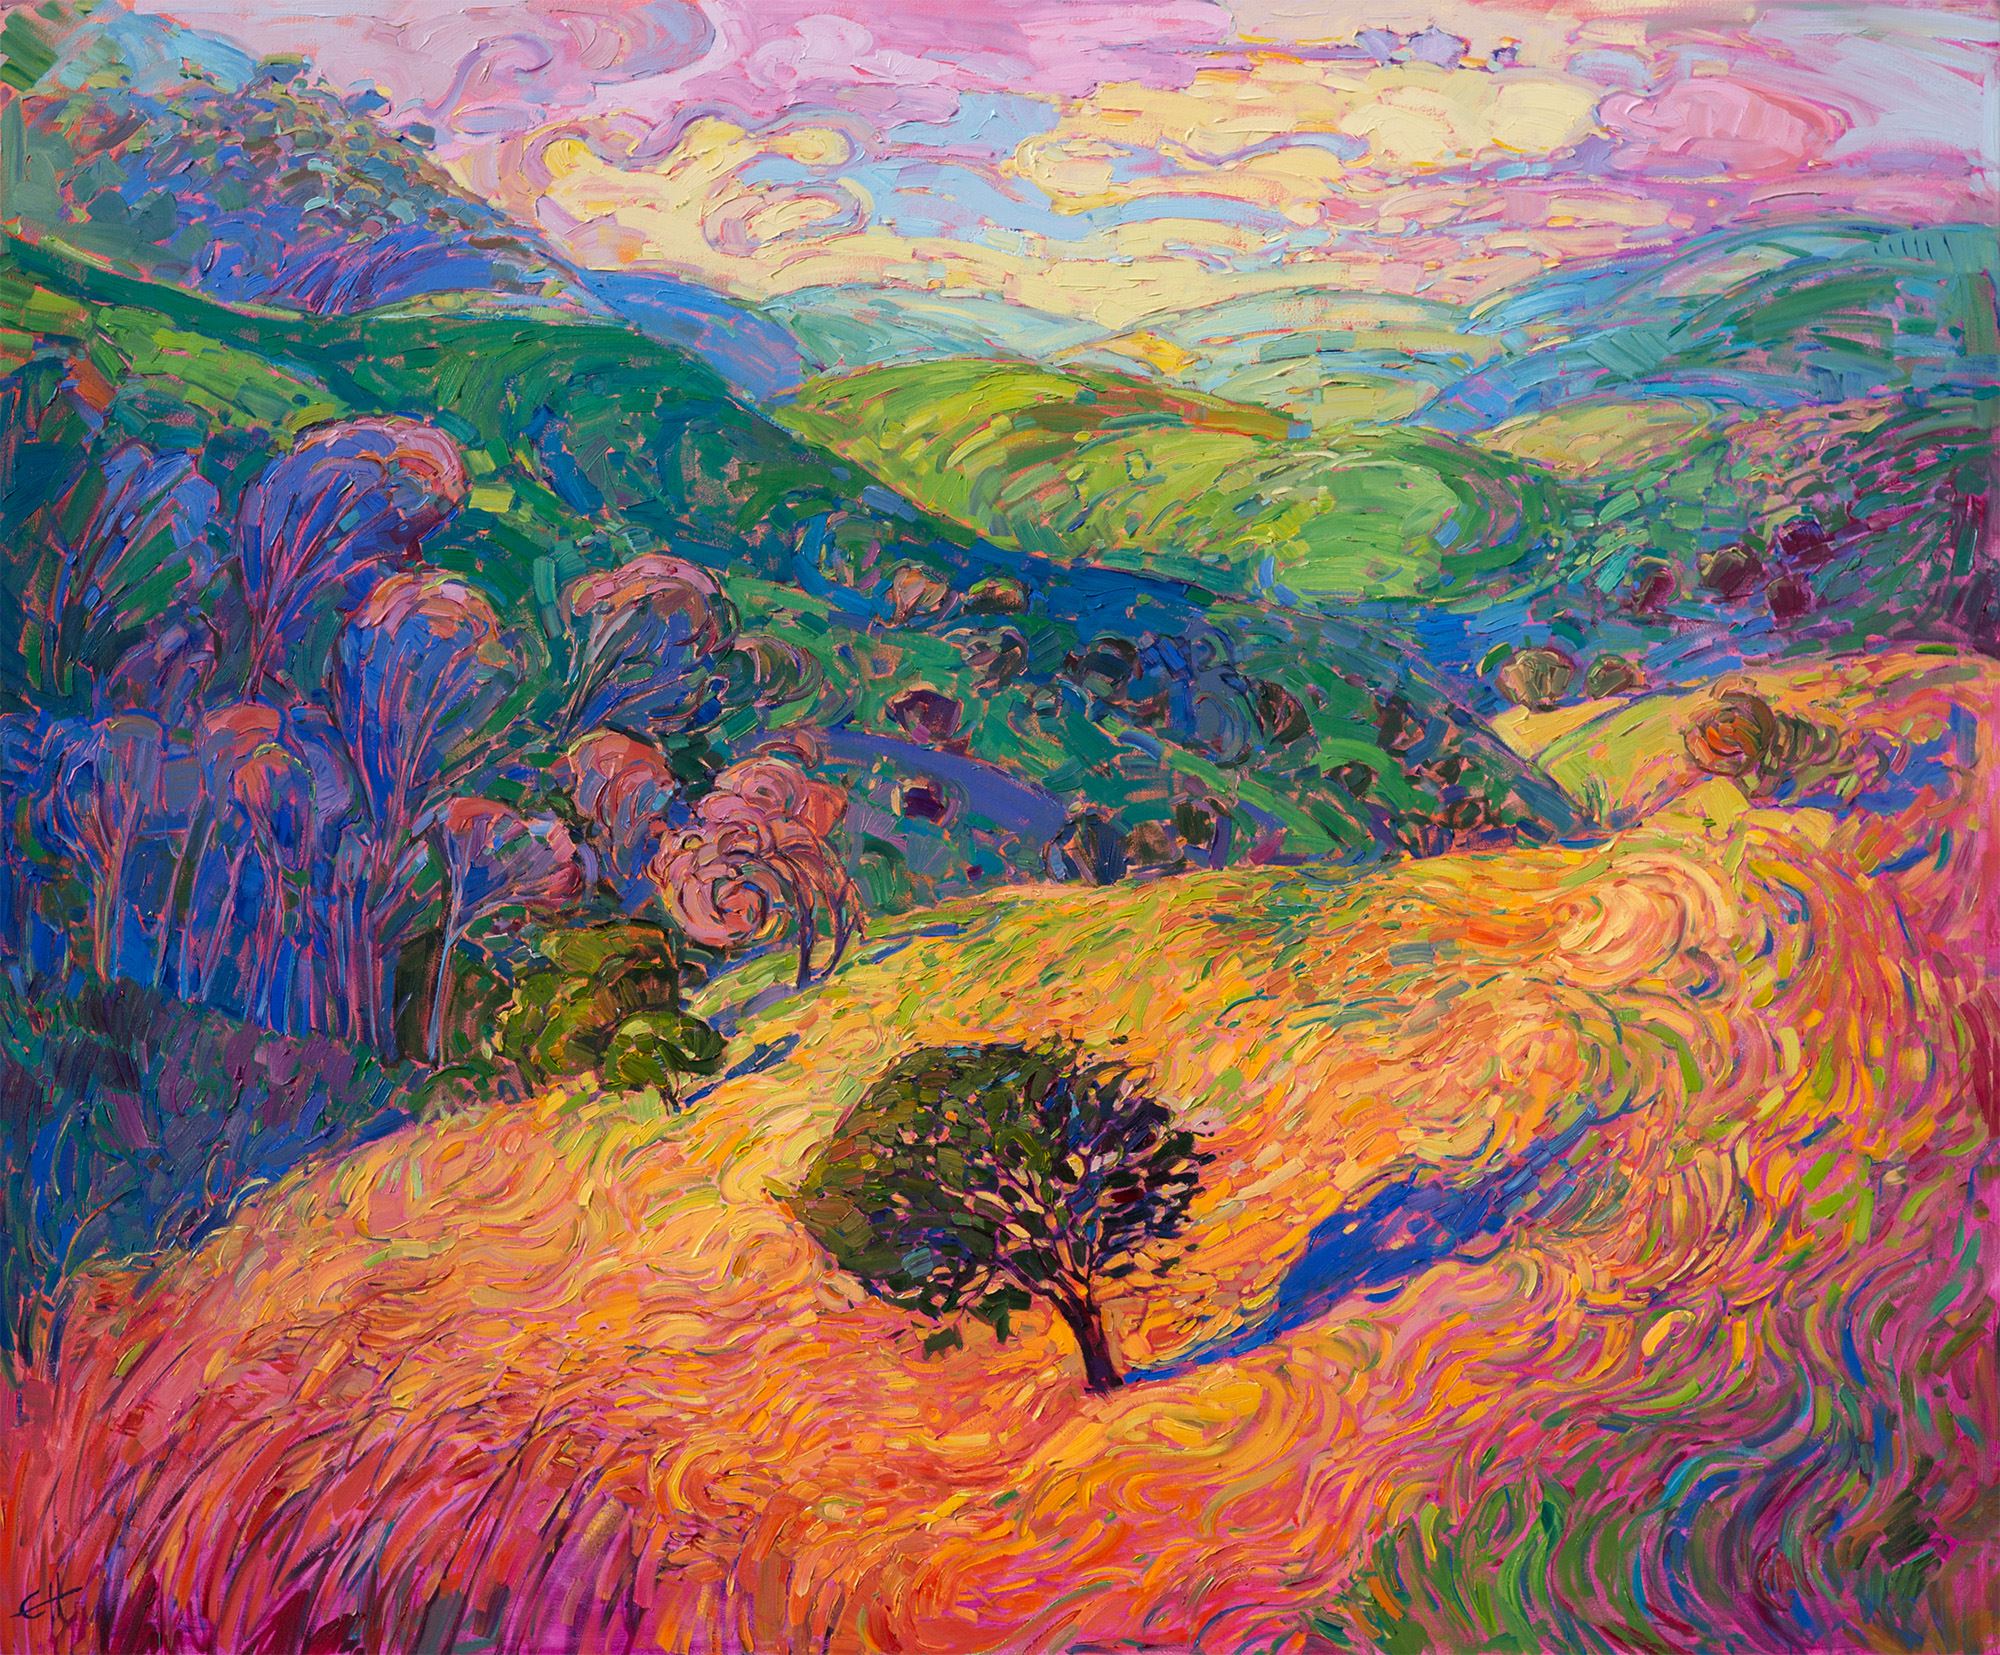 Erin Hanson painting Expanse of Color